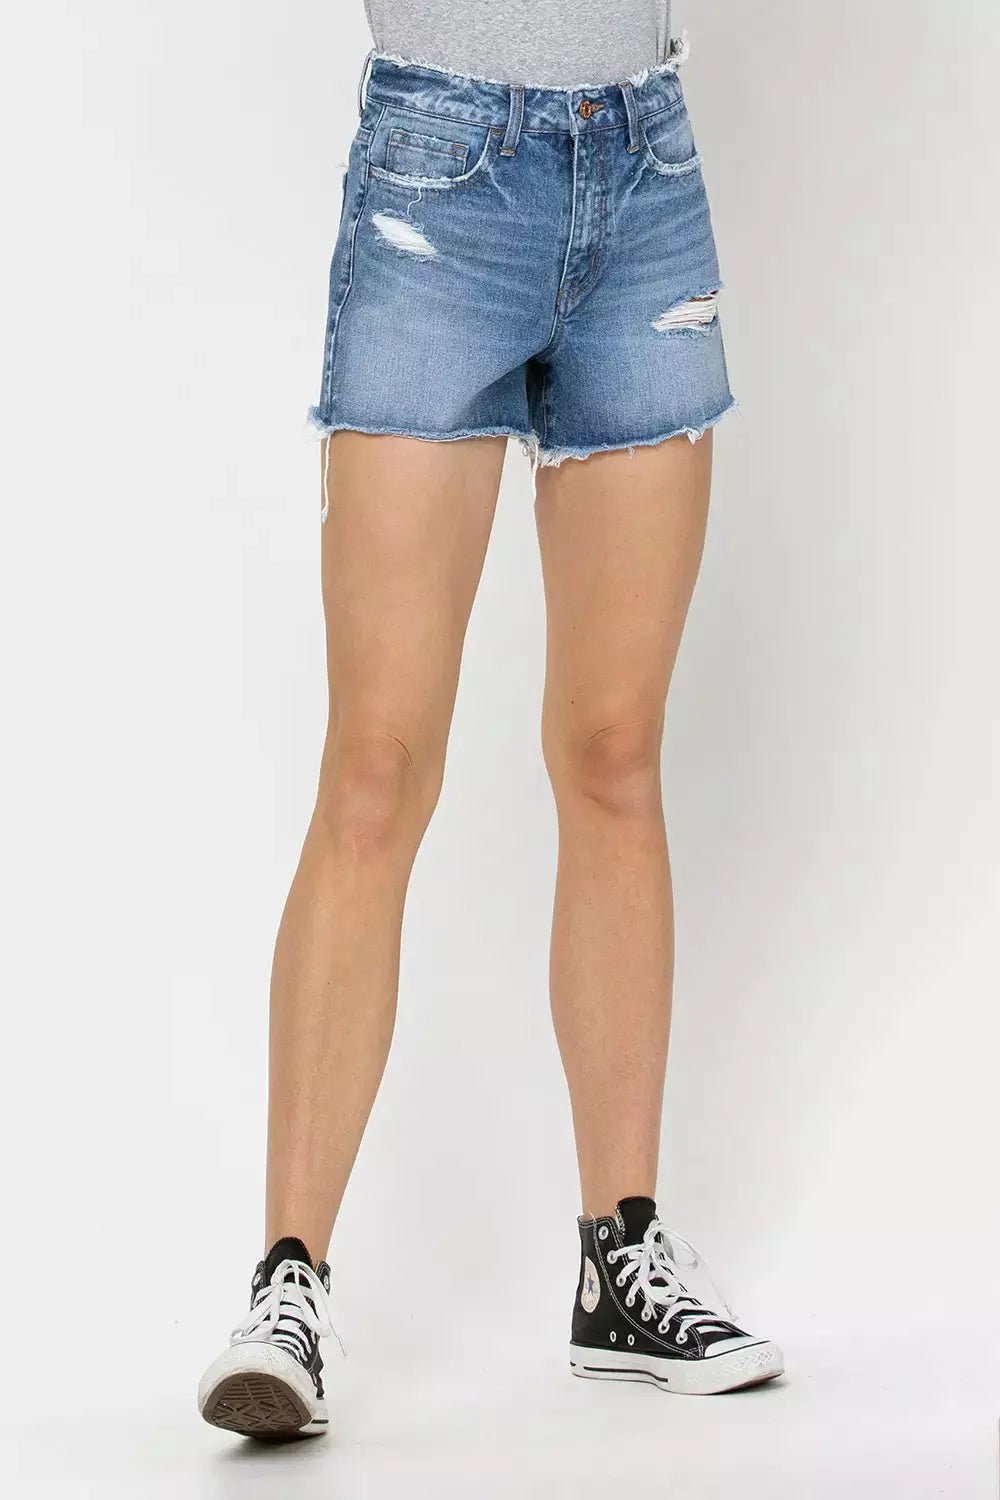 MOM SHORTS By FLYING MONKEY - Red Fox Boutique